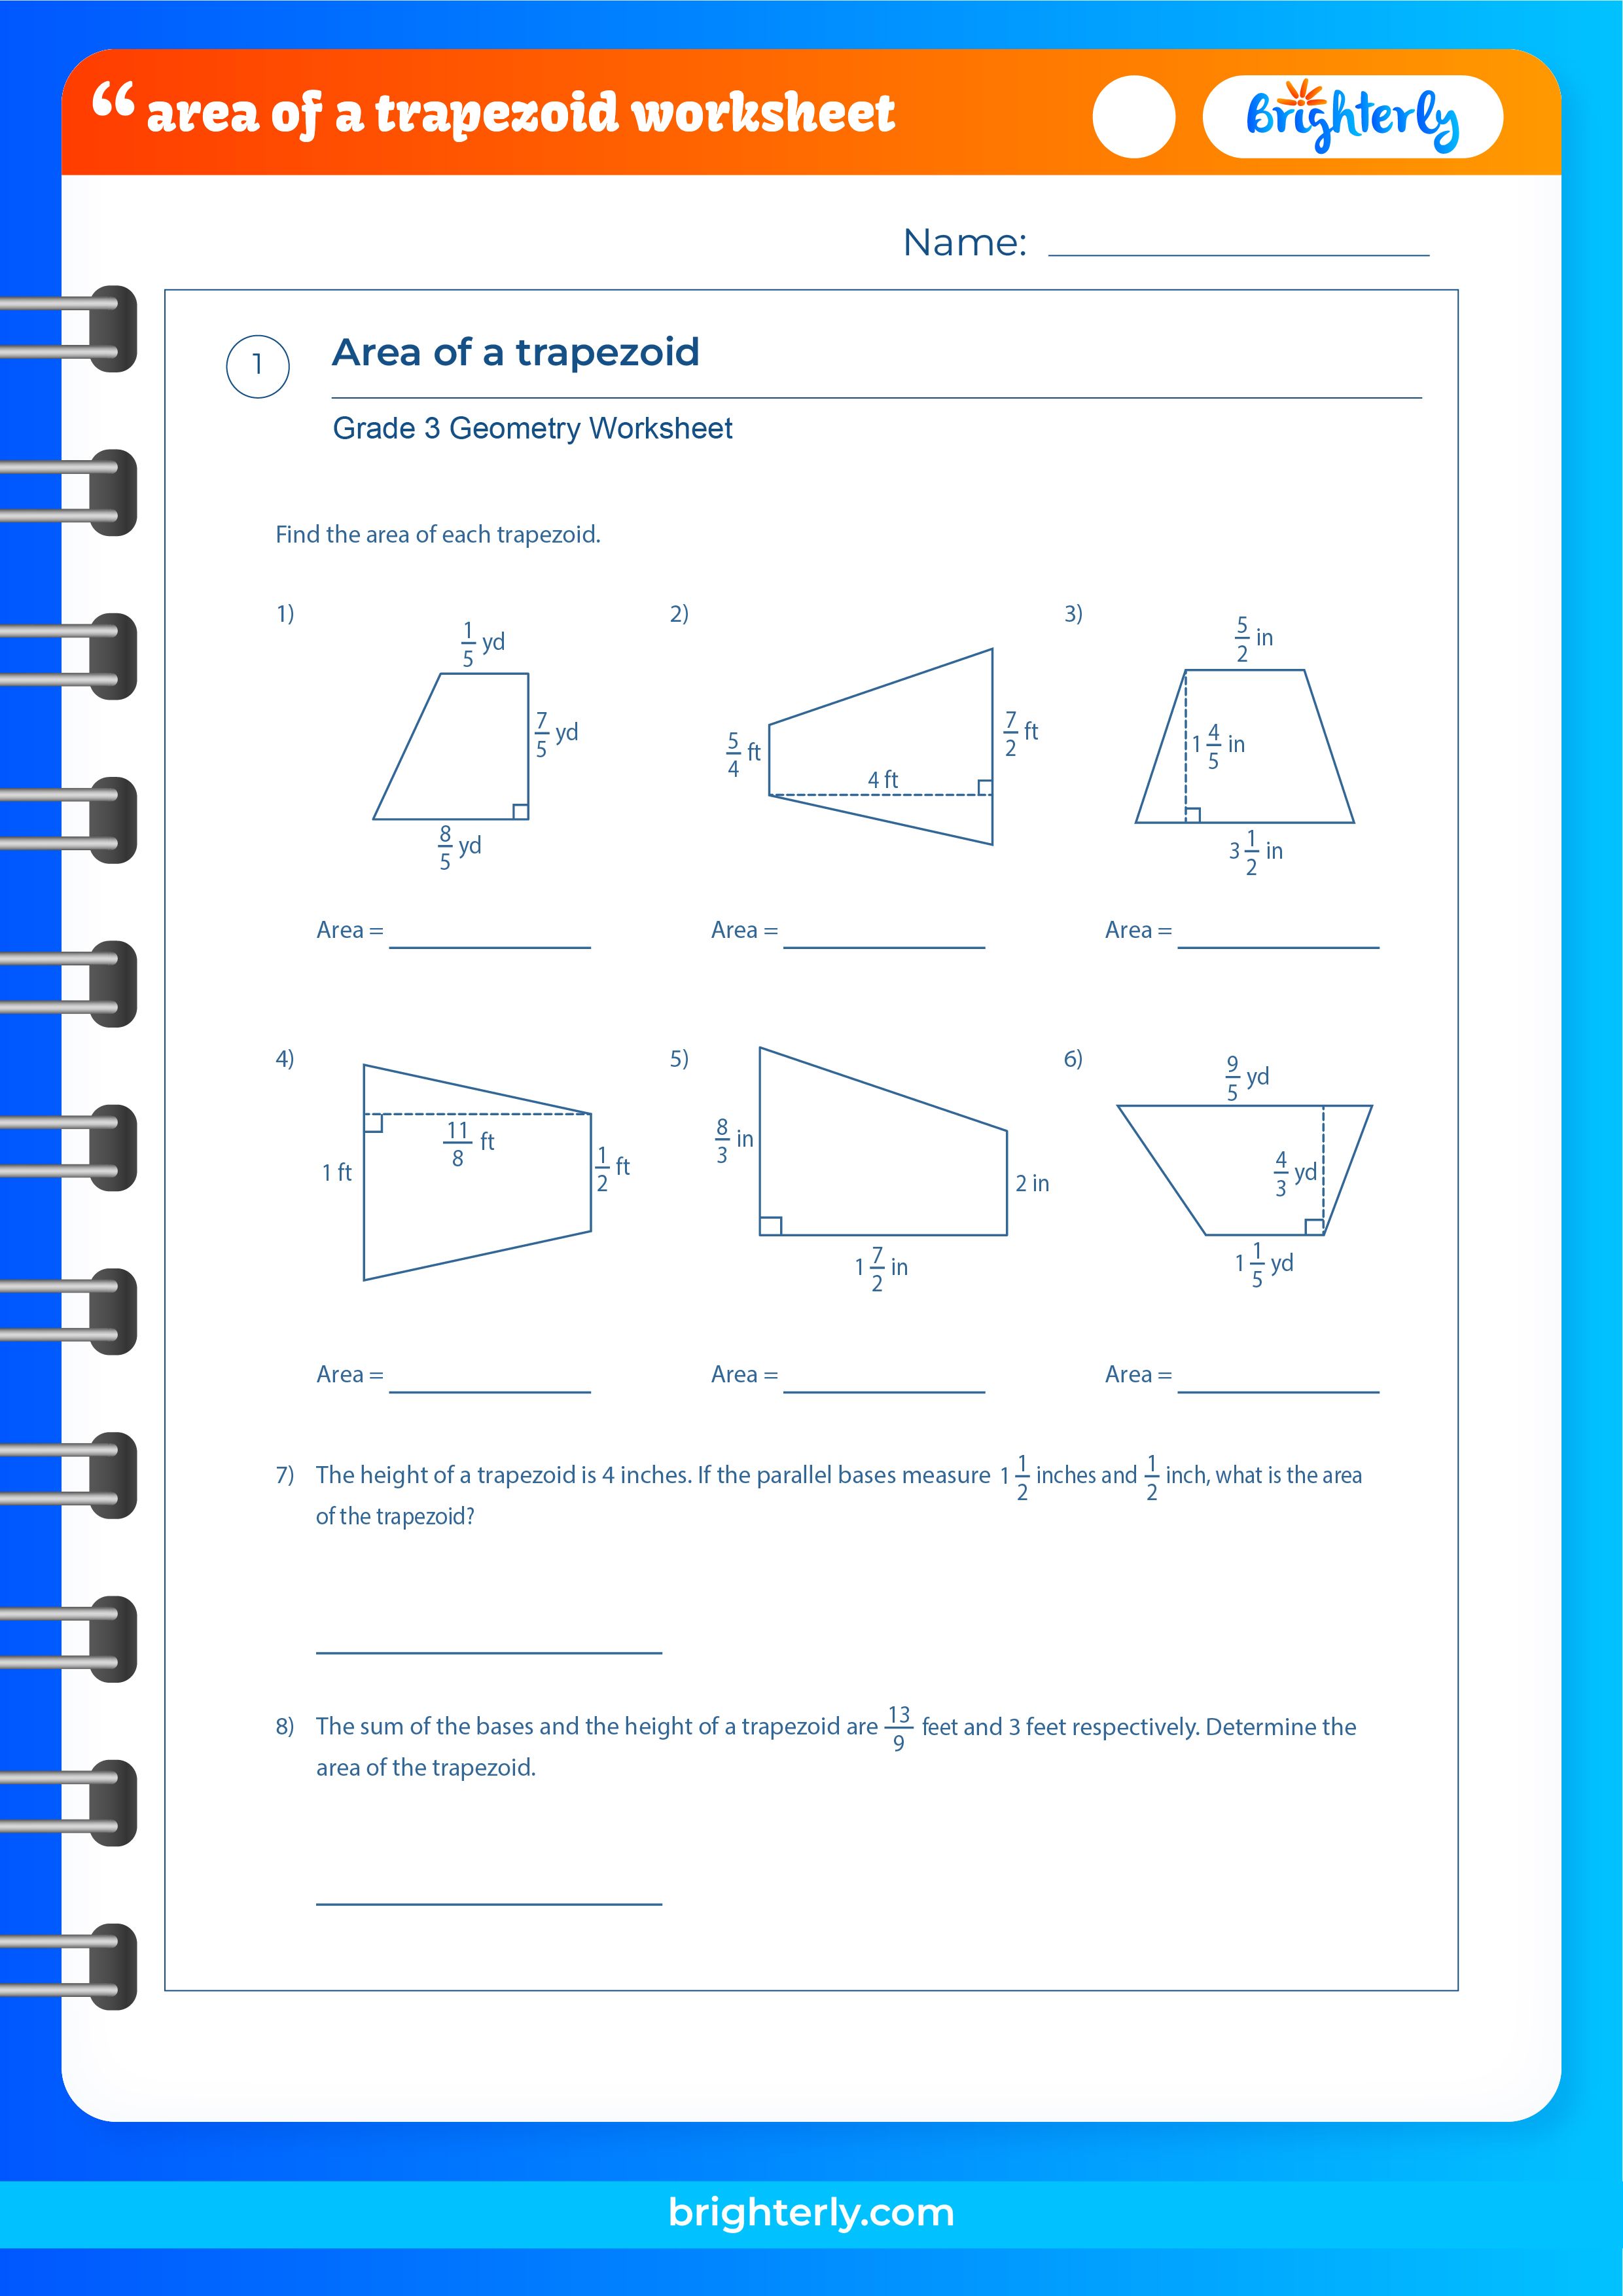 free-area-of-a-trapezoid-worksheets-for-kids-pdfs-brighterly